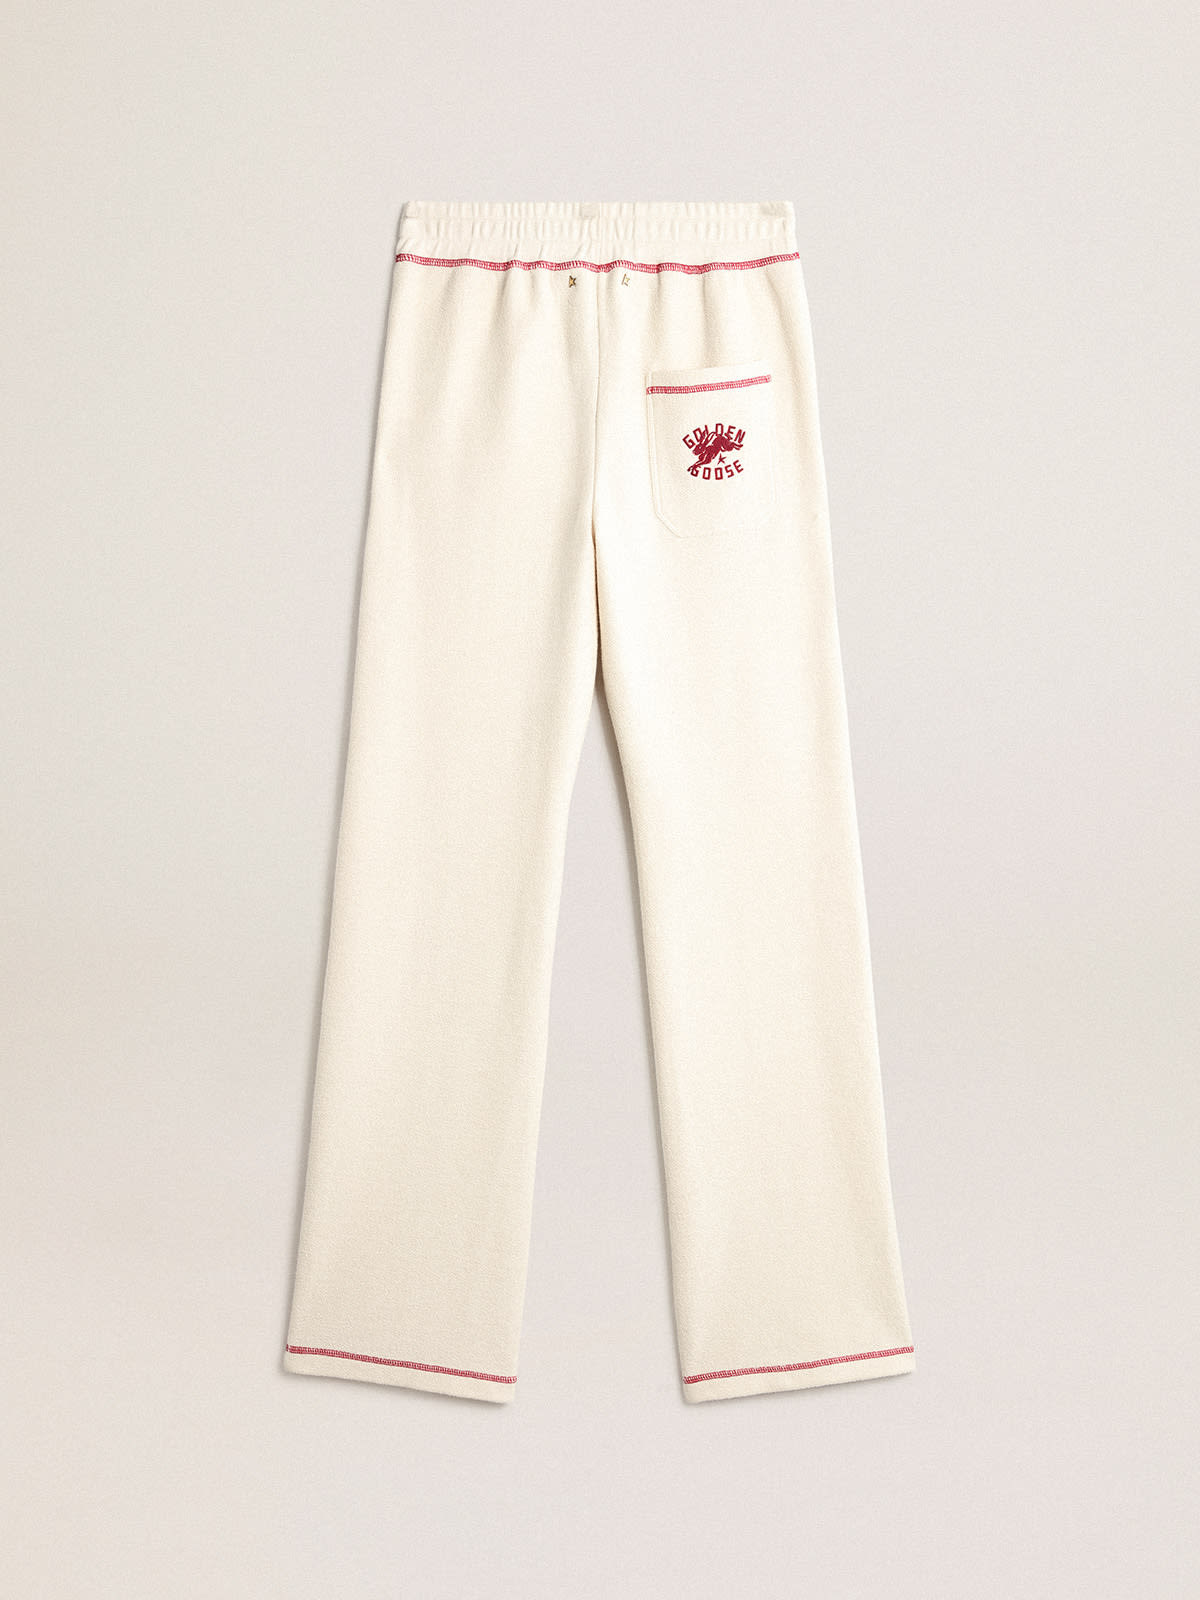 Women's heritage white joggers with CNY logo